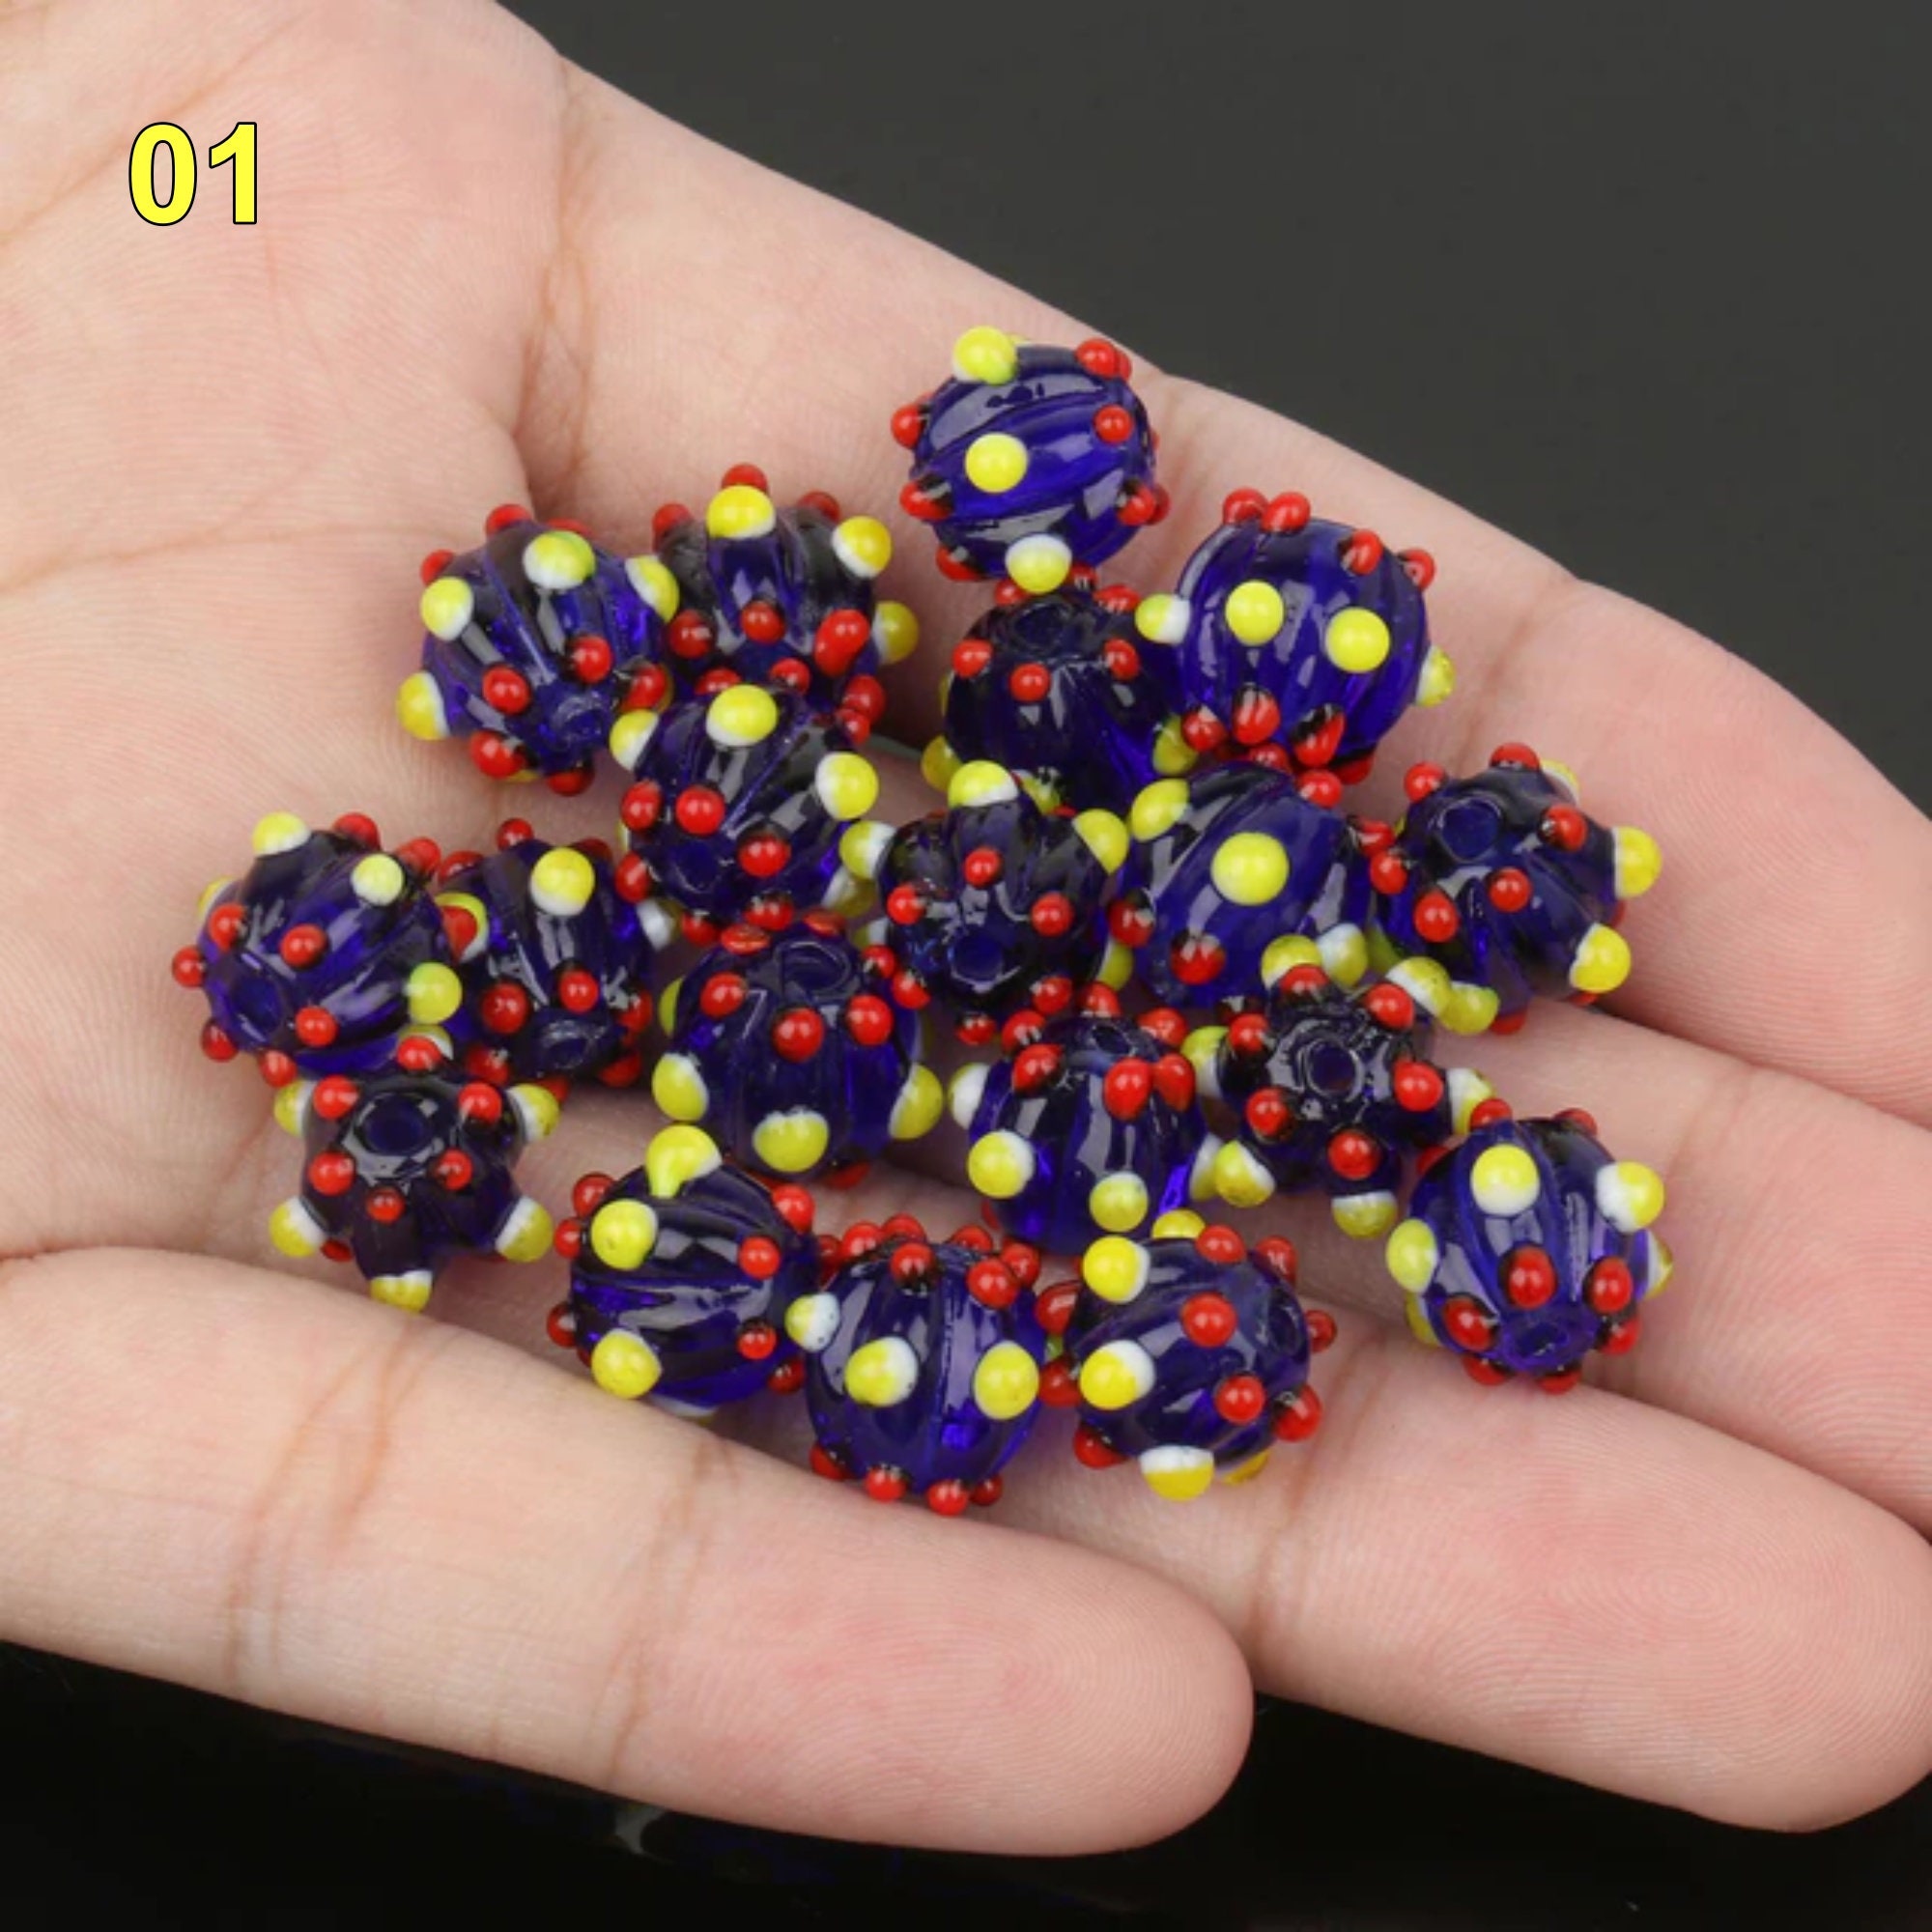 10pcs Crystal Glass Flower Bead Caps for Jewelry Making 